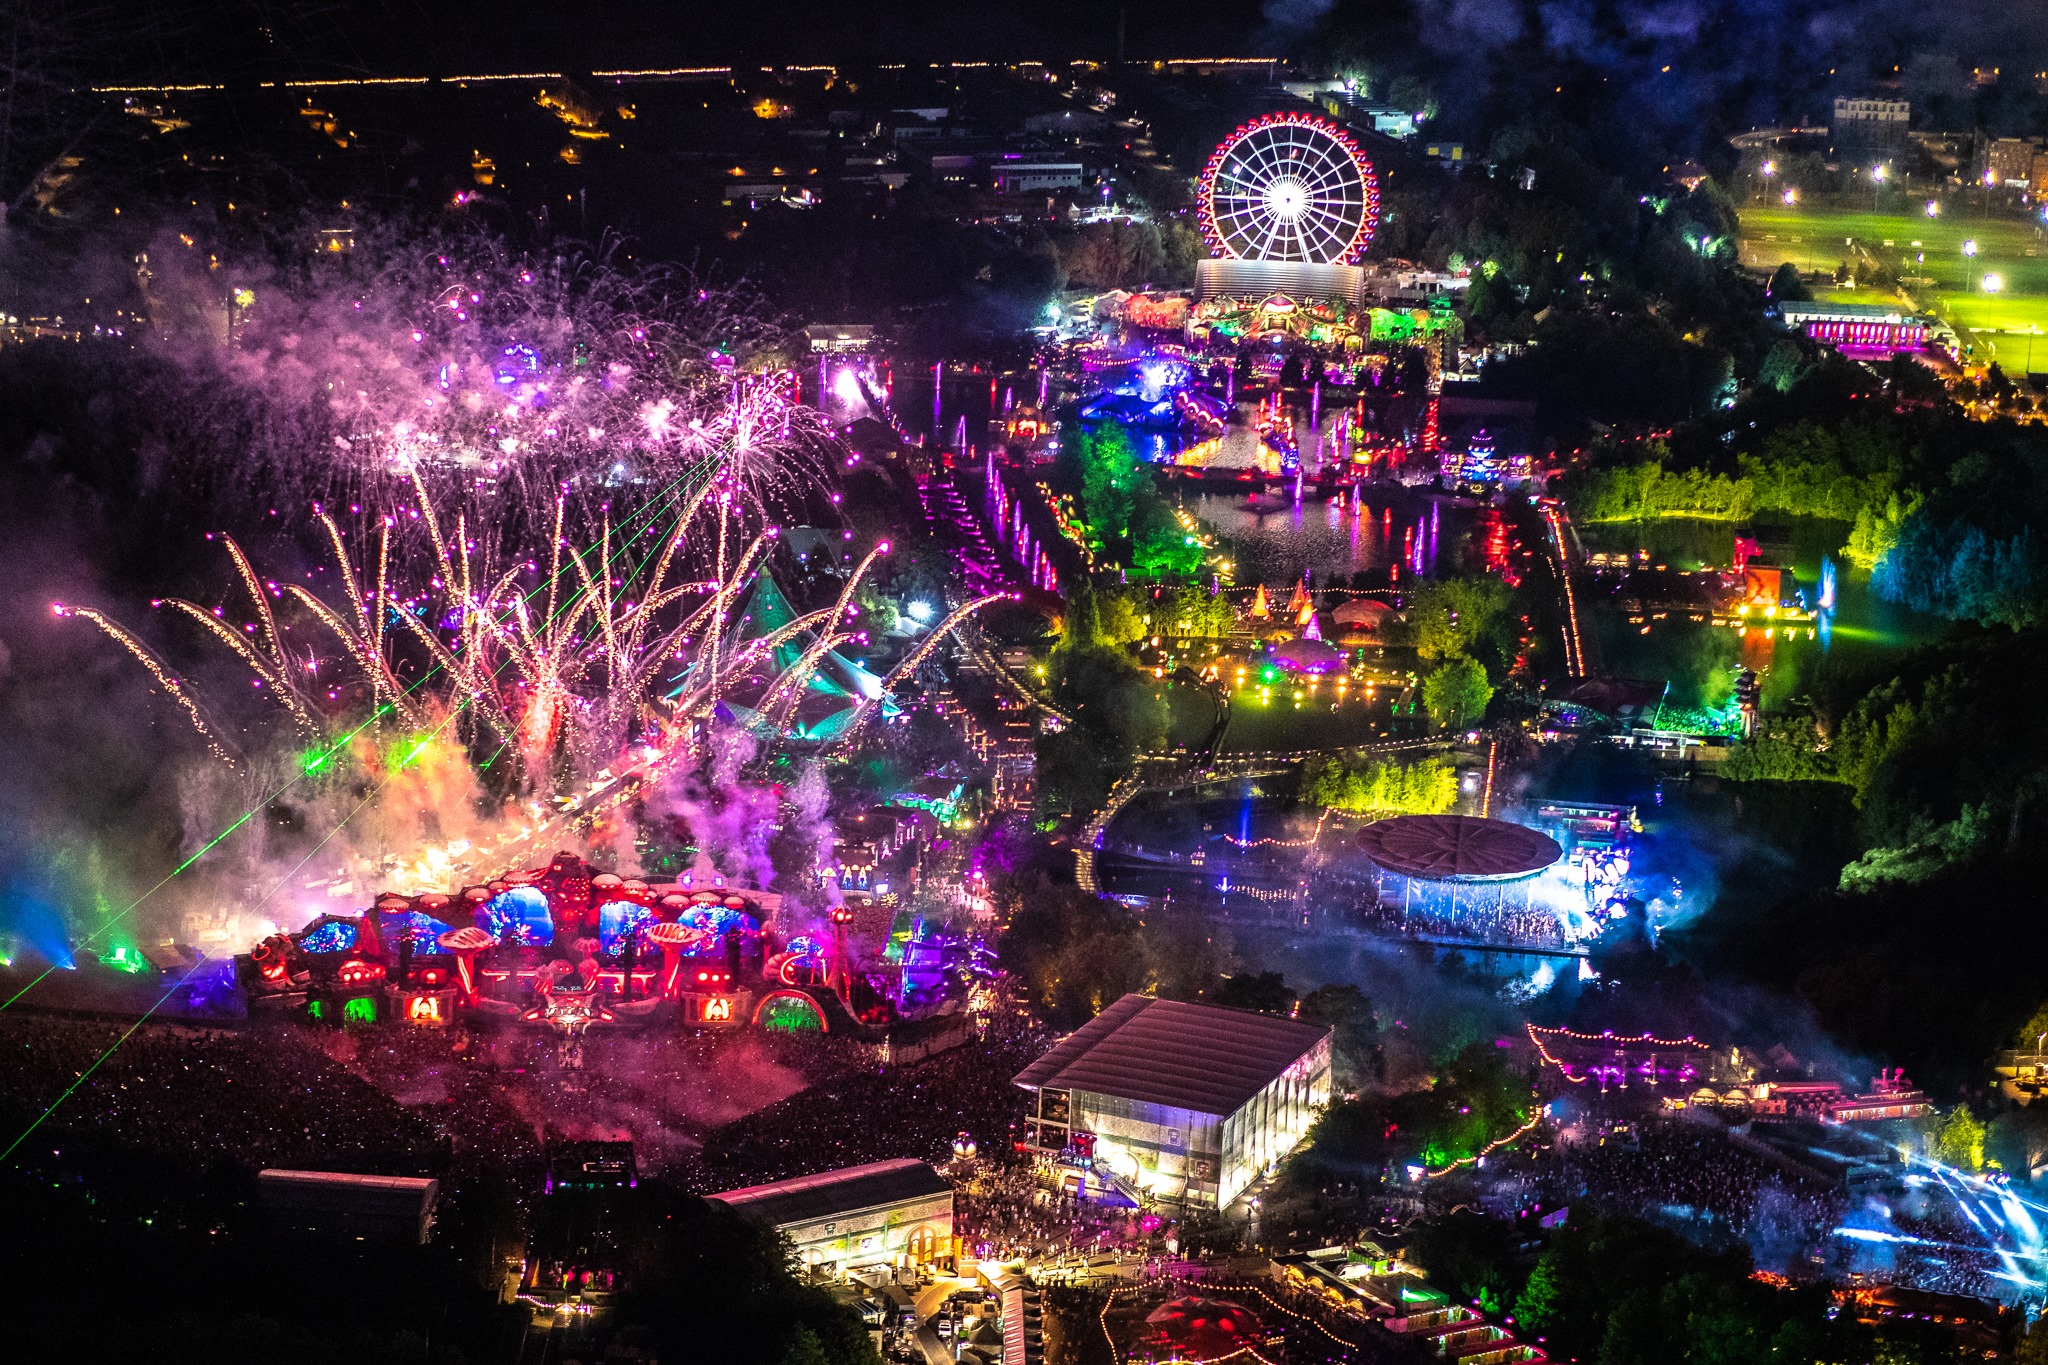 Tomorrowland 2020 sells out in five minutes | DJMag.com